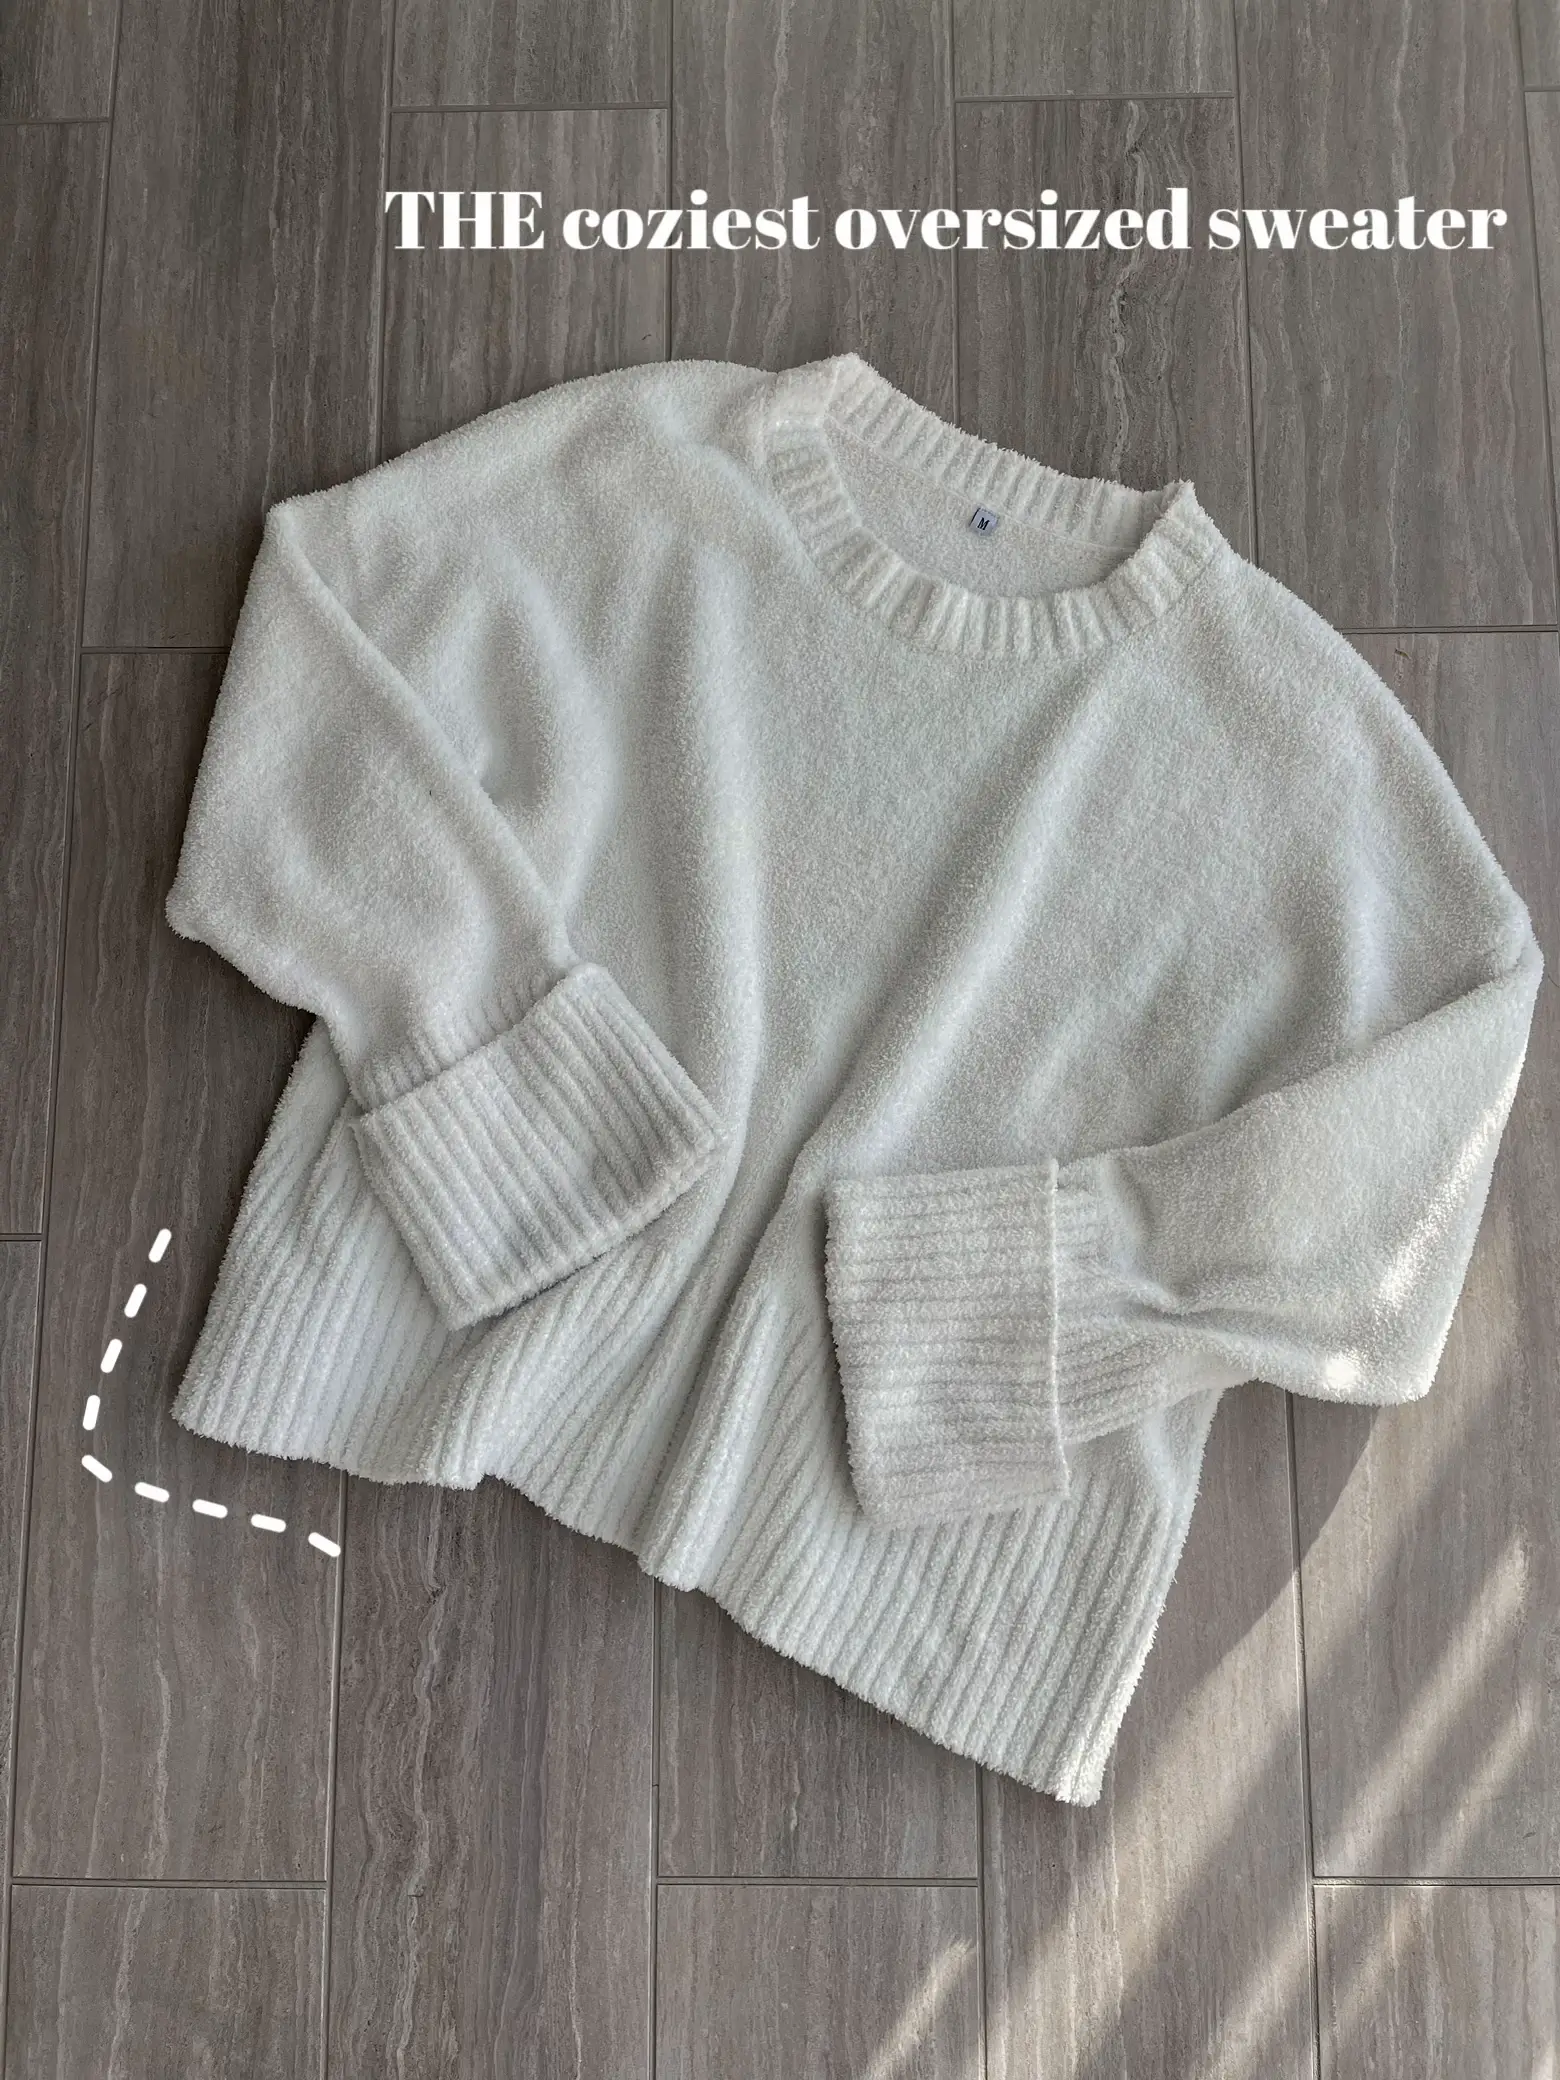  A white sweater with a pattern.